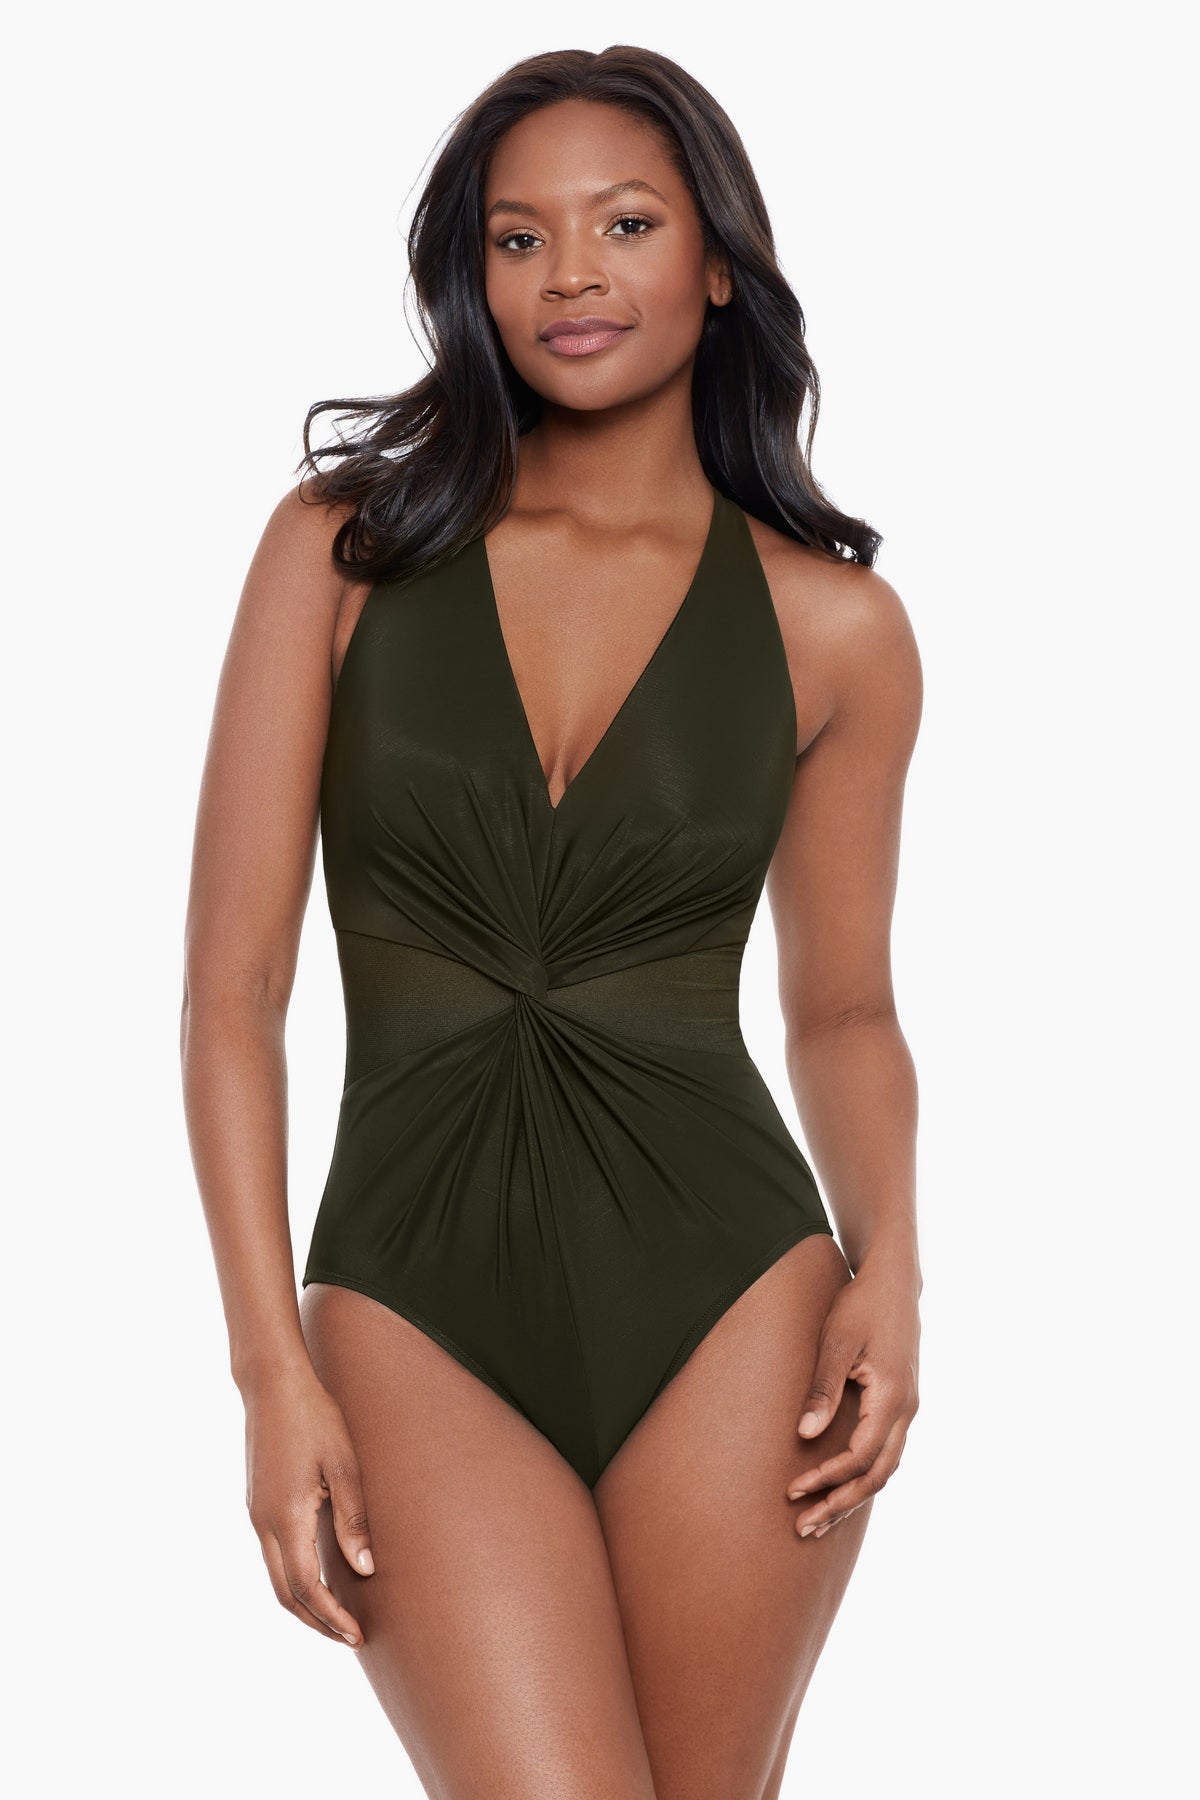 Network New Sensations Madero One Piece Swimsuit